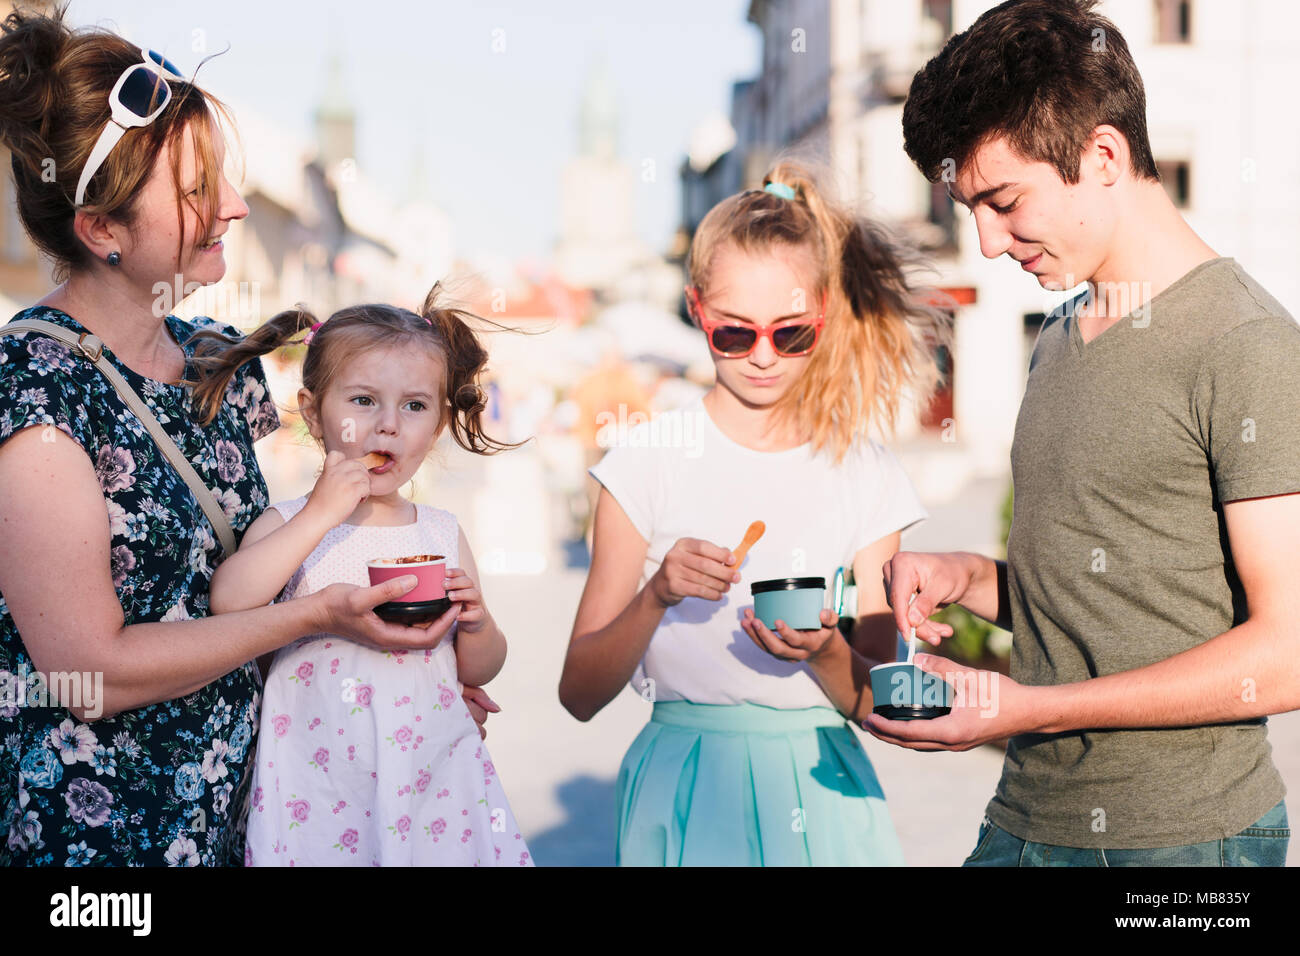 Family spending time together in the city centre enjoy eating ice cream on summer day. Mother, toddler and teenage girl and boy spending quality time Stock Photo